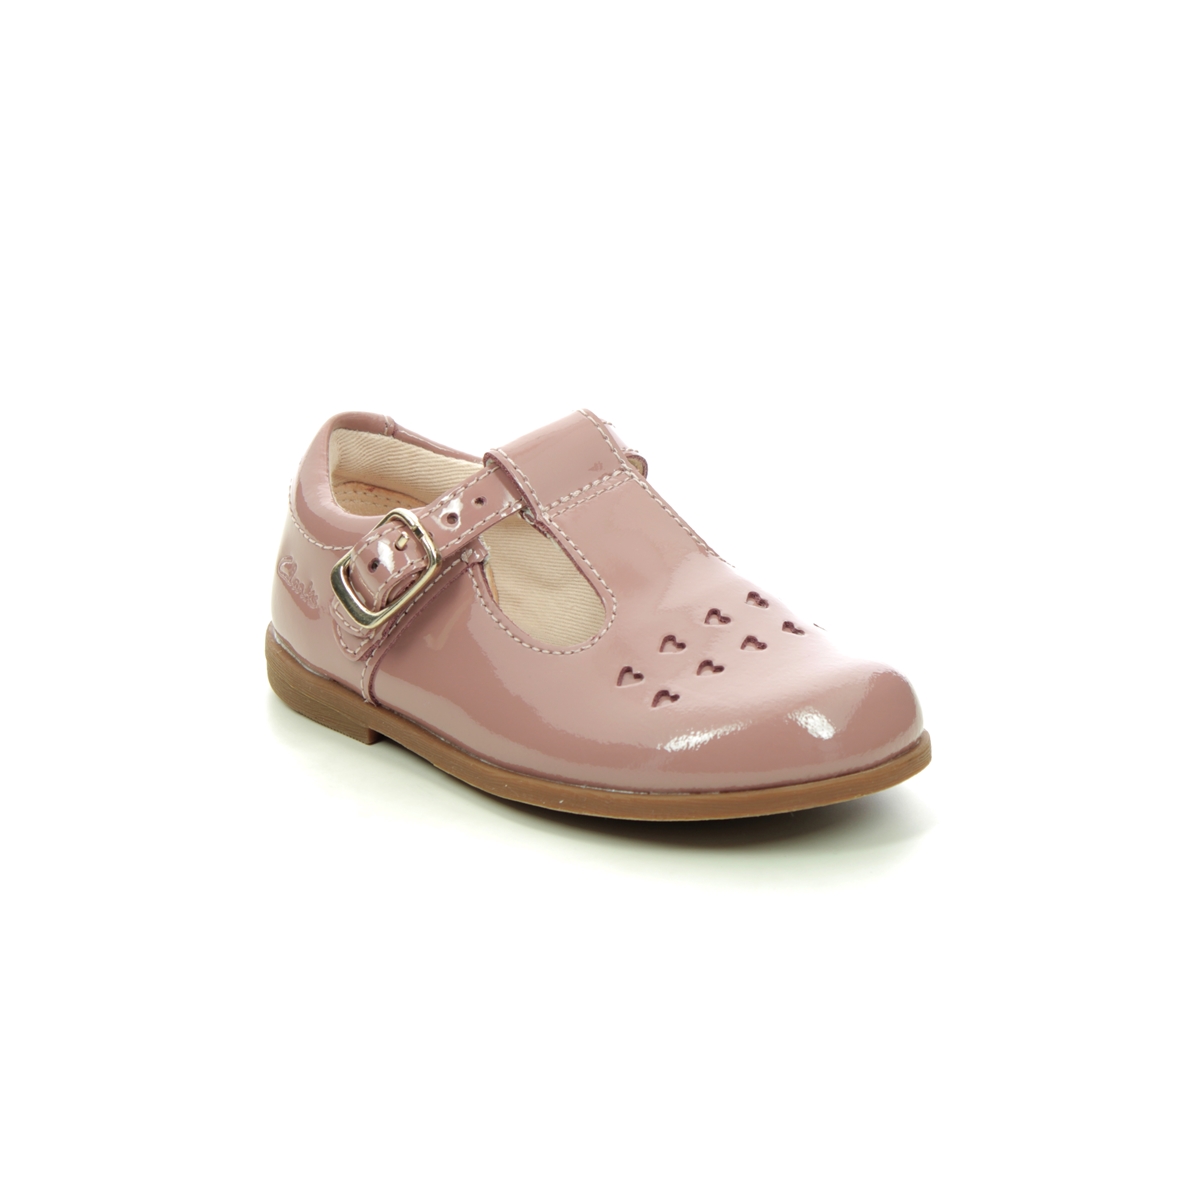 Clarks Drew Play T Pink Kids First And Toddler 651976F In Size 4.5 In Plain Pink F Width Fitting Regular Fit For kids